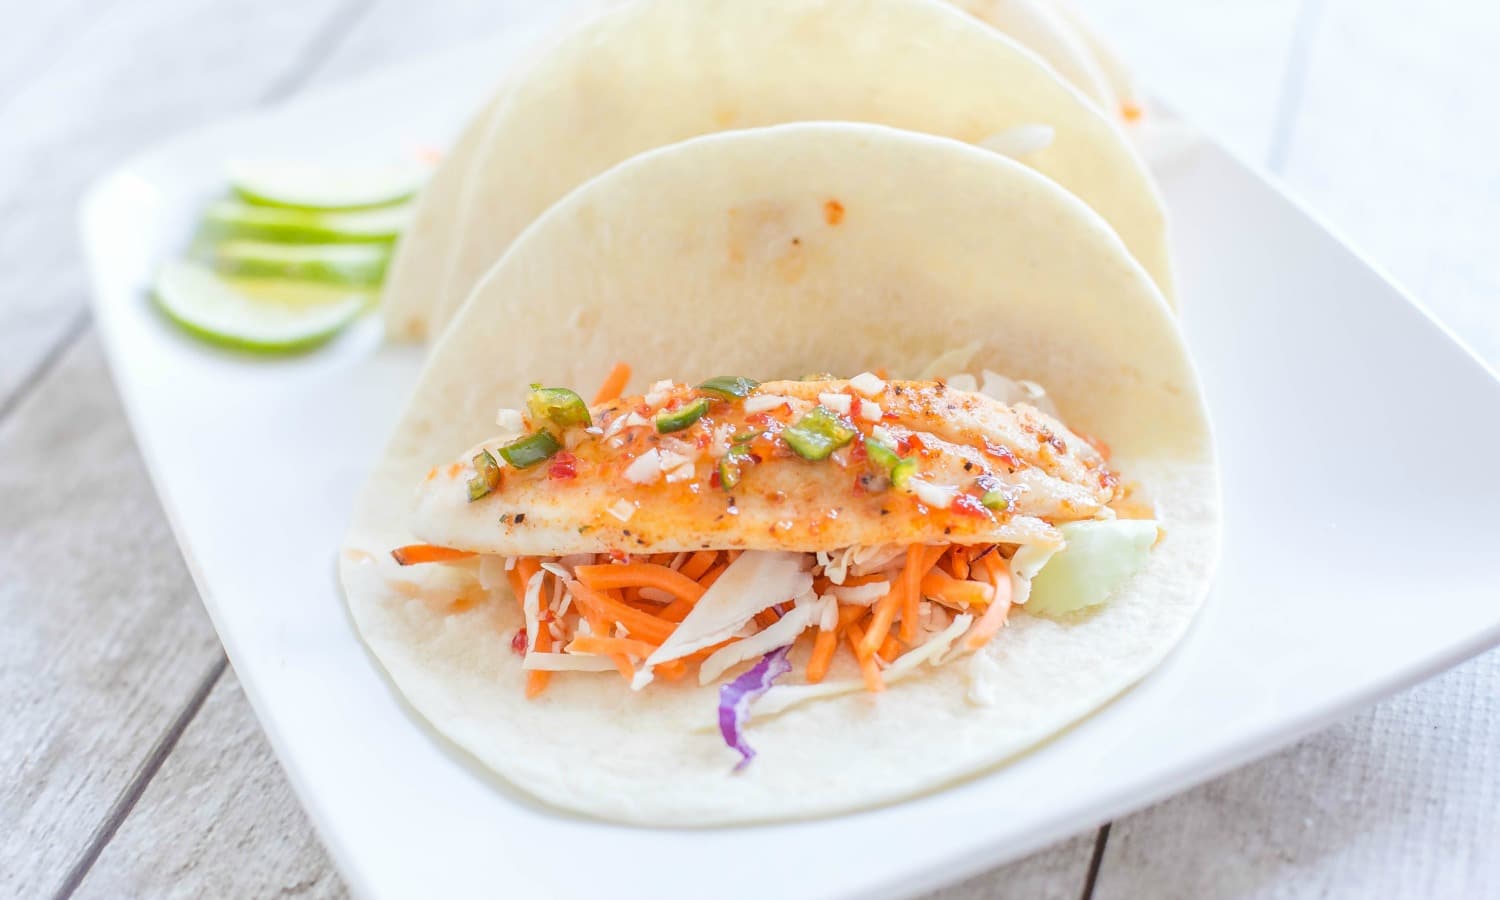 These simple fish tacos are flavorful and super easy to make - less than 20 minutes!